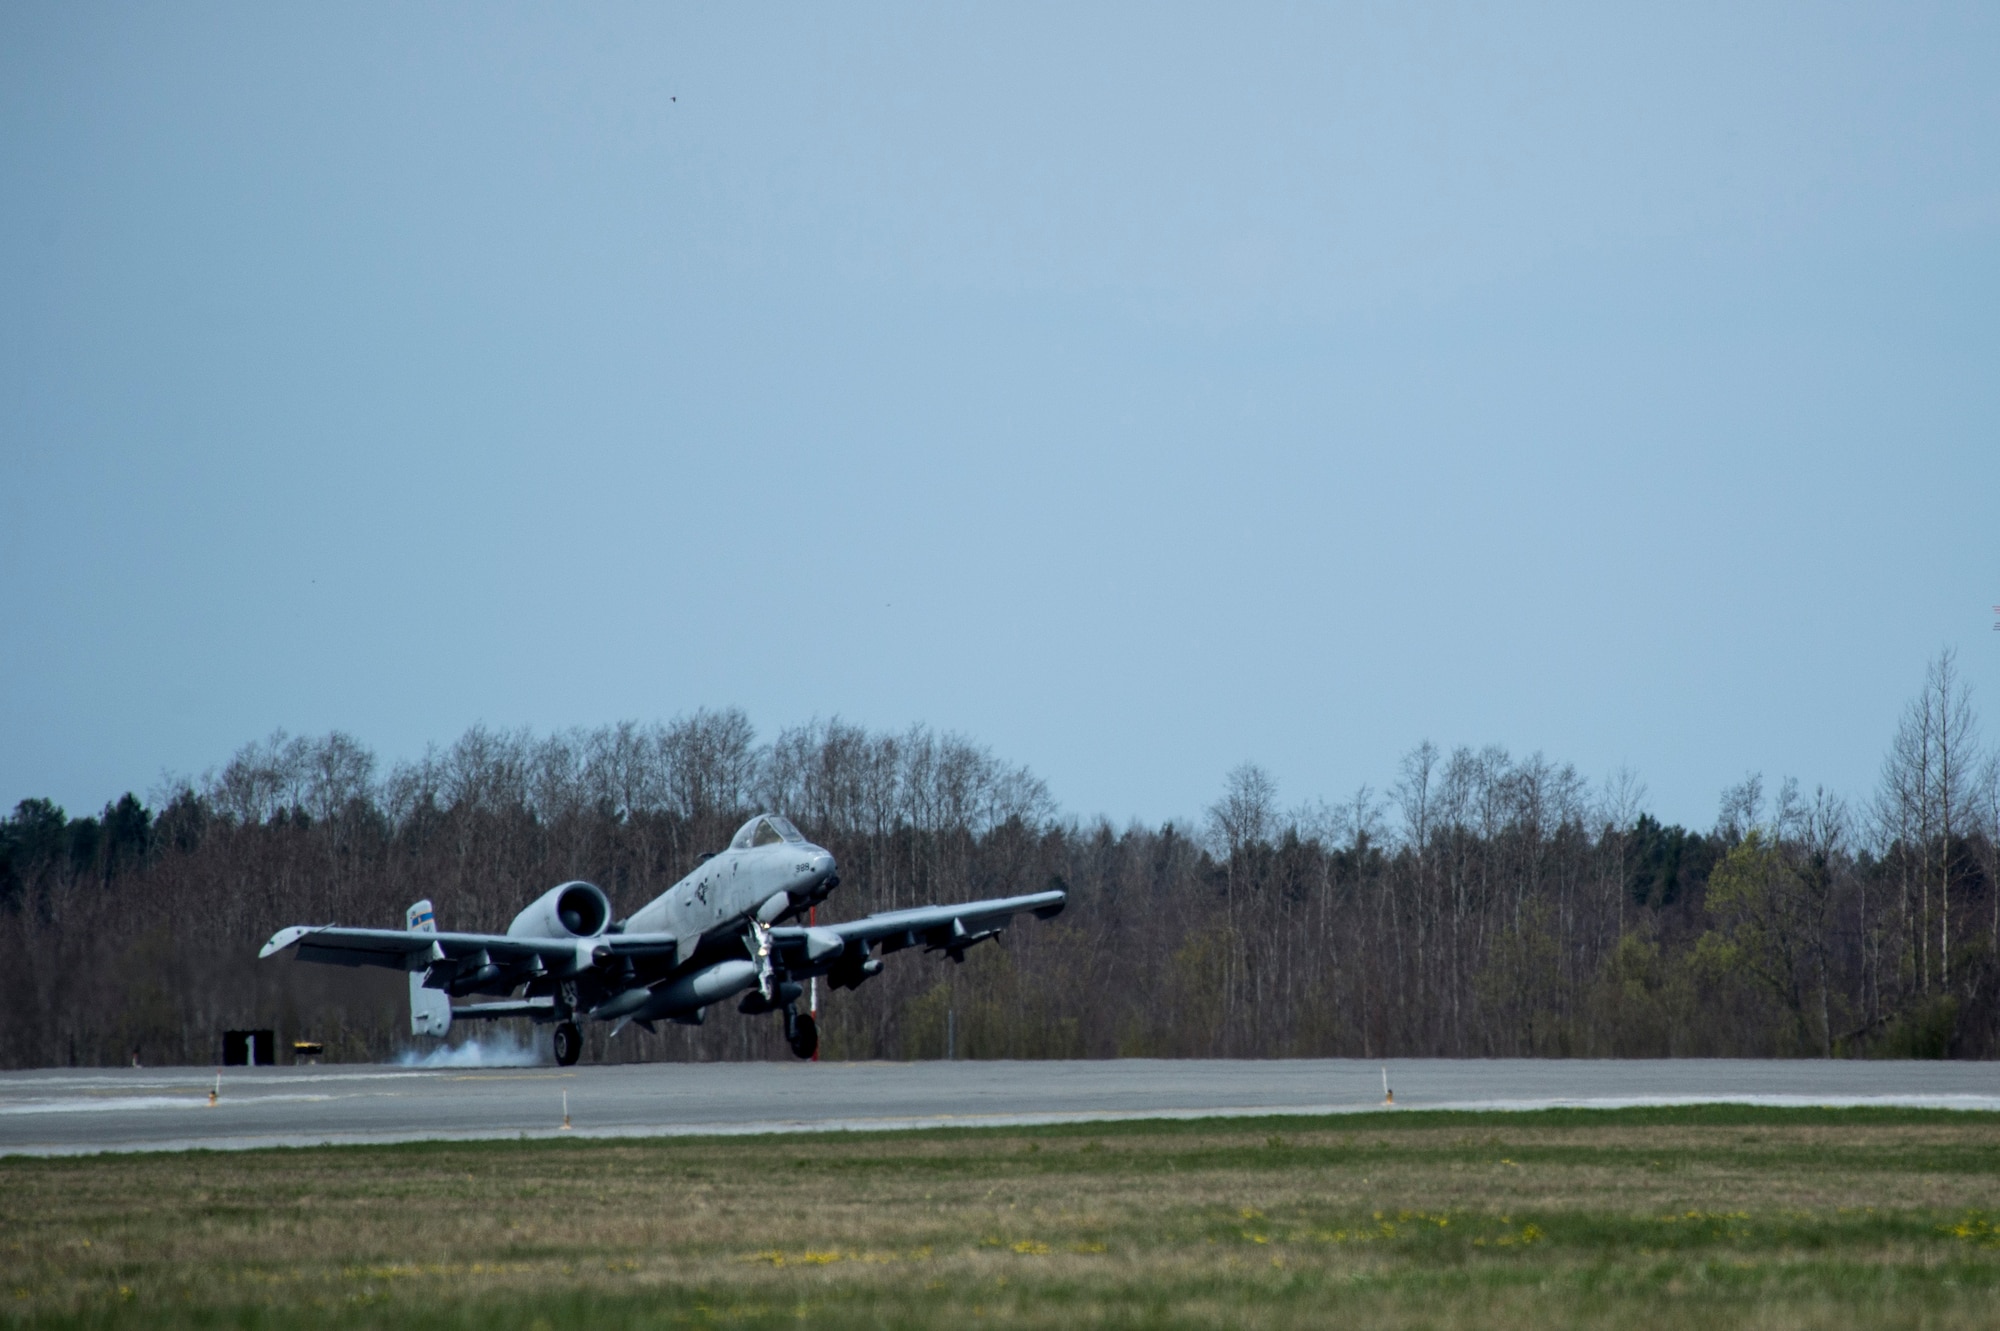 An A-10 Thunderbolt II attack aircraft lands on the runway May 1, 2015, at Ämari Air Base, Estonia. The U.S. and Estonian air forces will conduct training aimed to strengthen interoperability and demonstrate the countries' shared commitment to the security and stability of Europe.  (U.S. Air Force photo by Senior Airman Rusty Frank/Released)